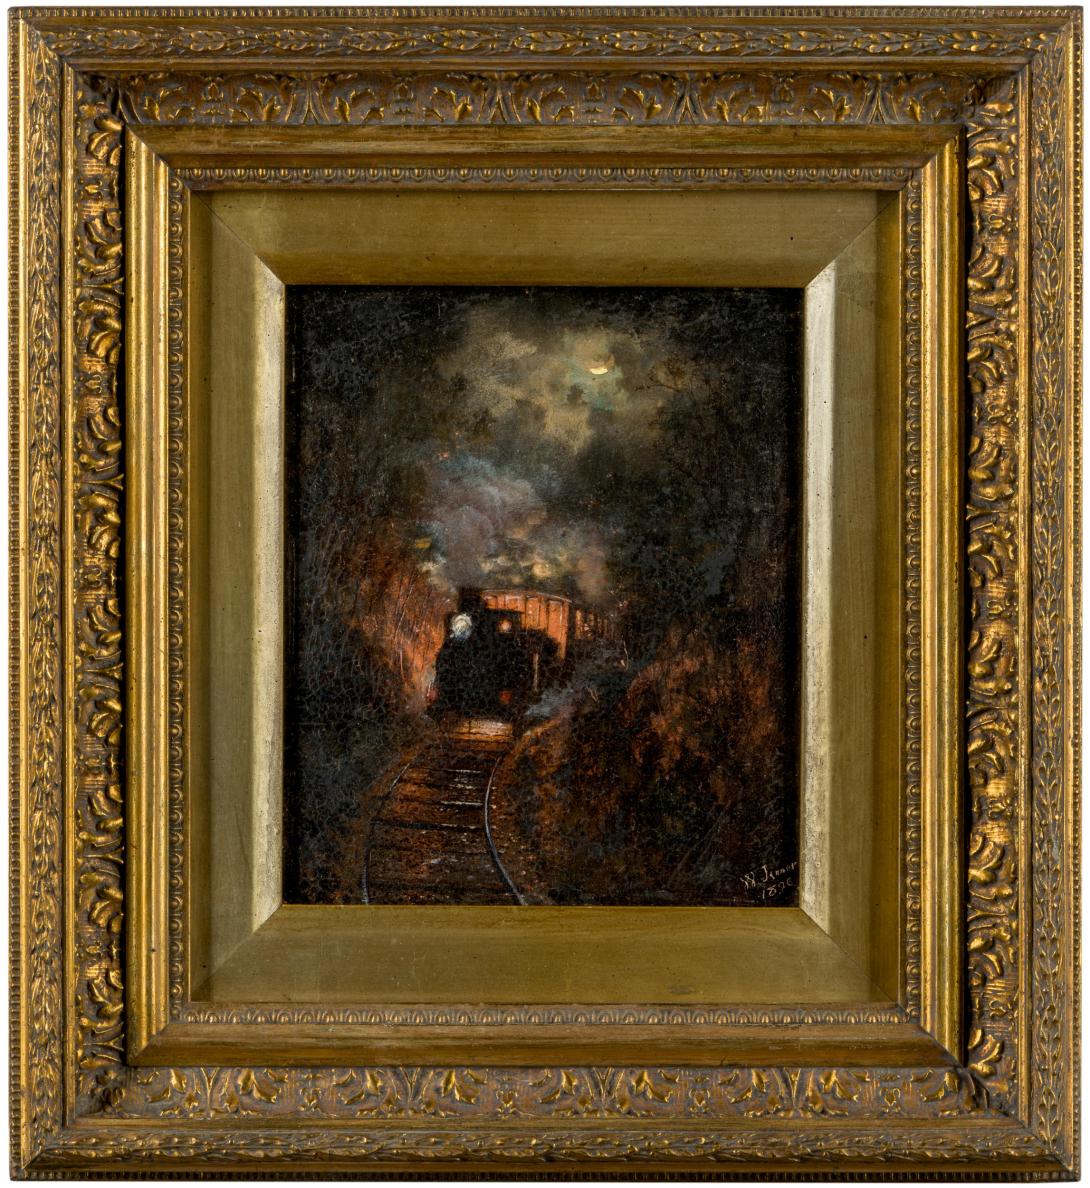 An oil painting of a steam engine emerging from the night, its engine lit up red and smoky. The painting has a wide, tarnished gold frame.